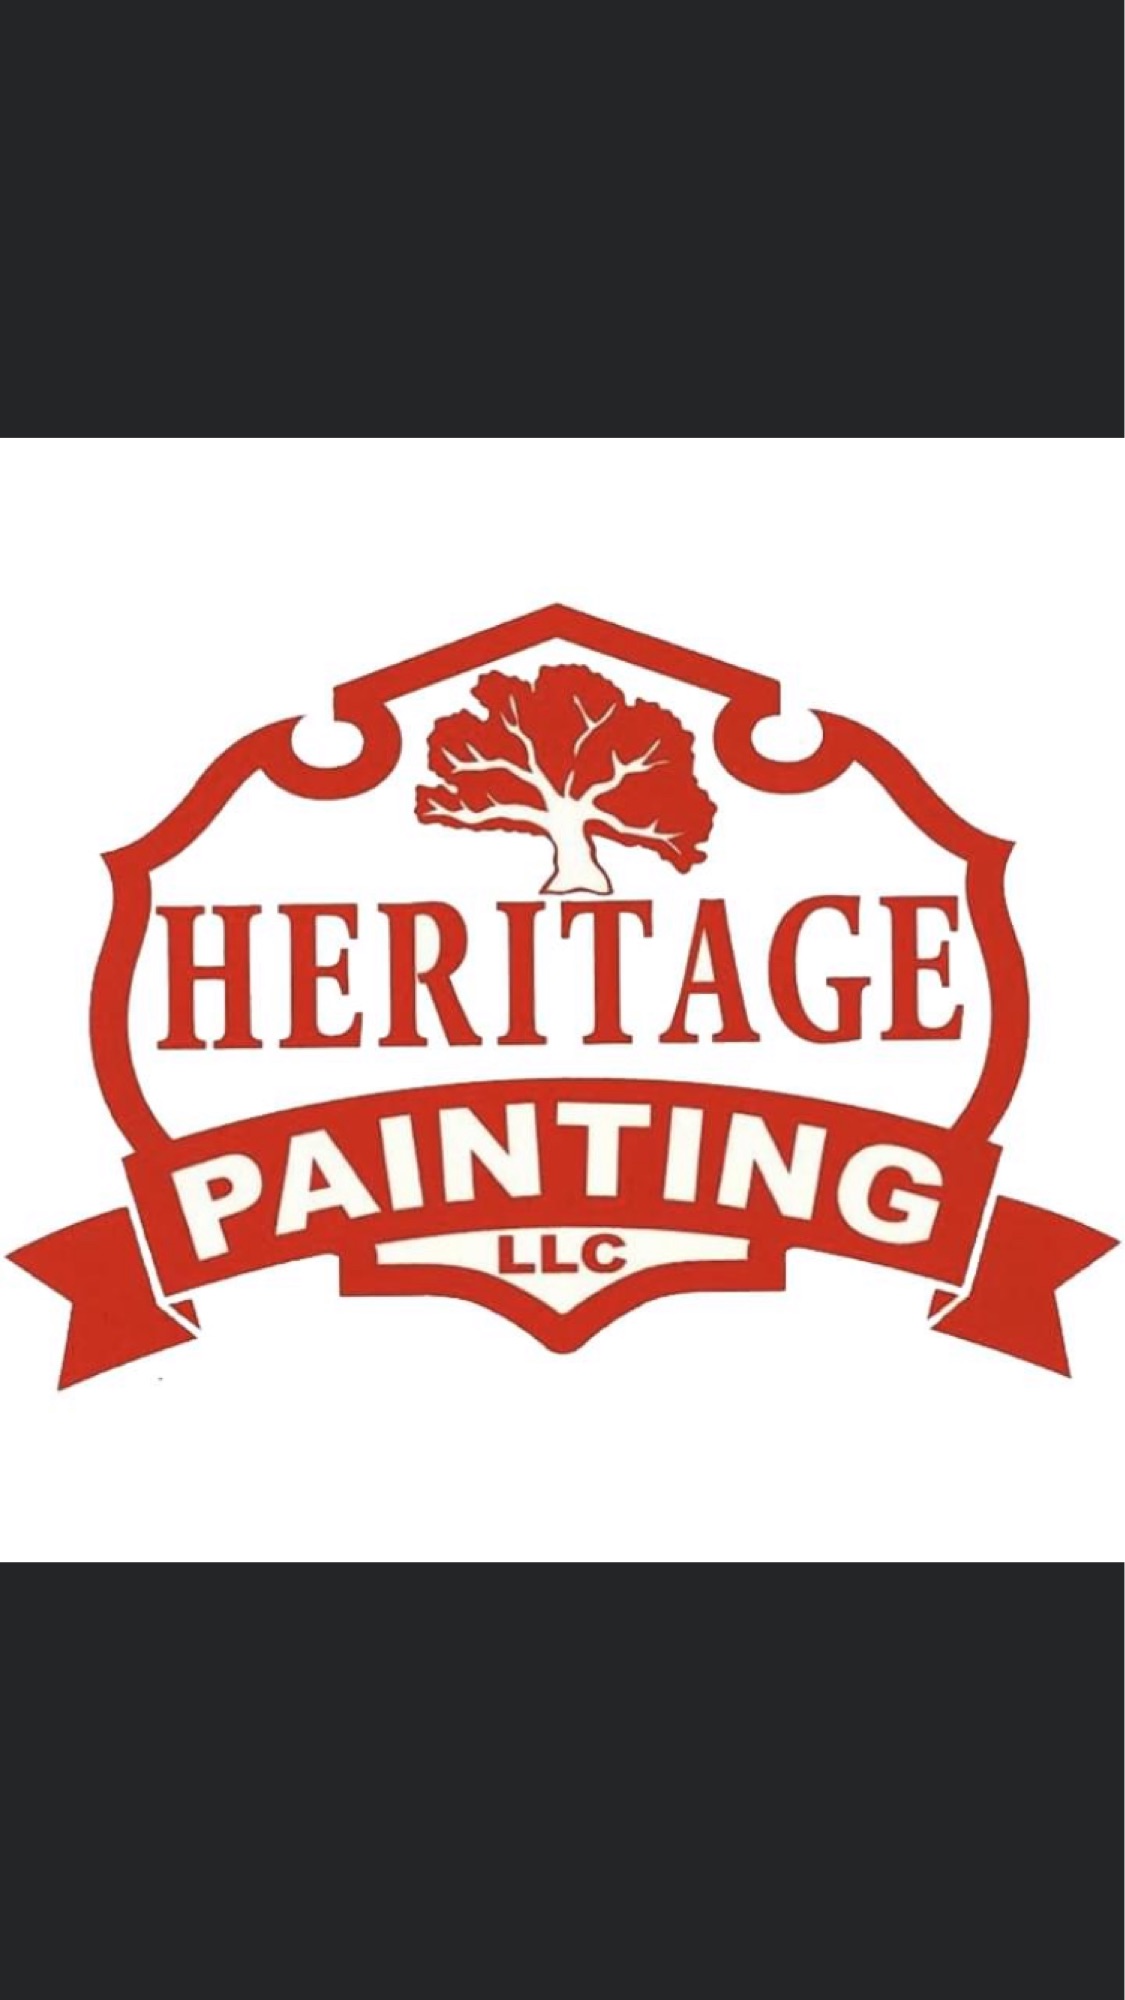 Heritage Painting - Home  Facebook Logo